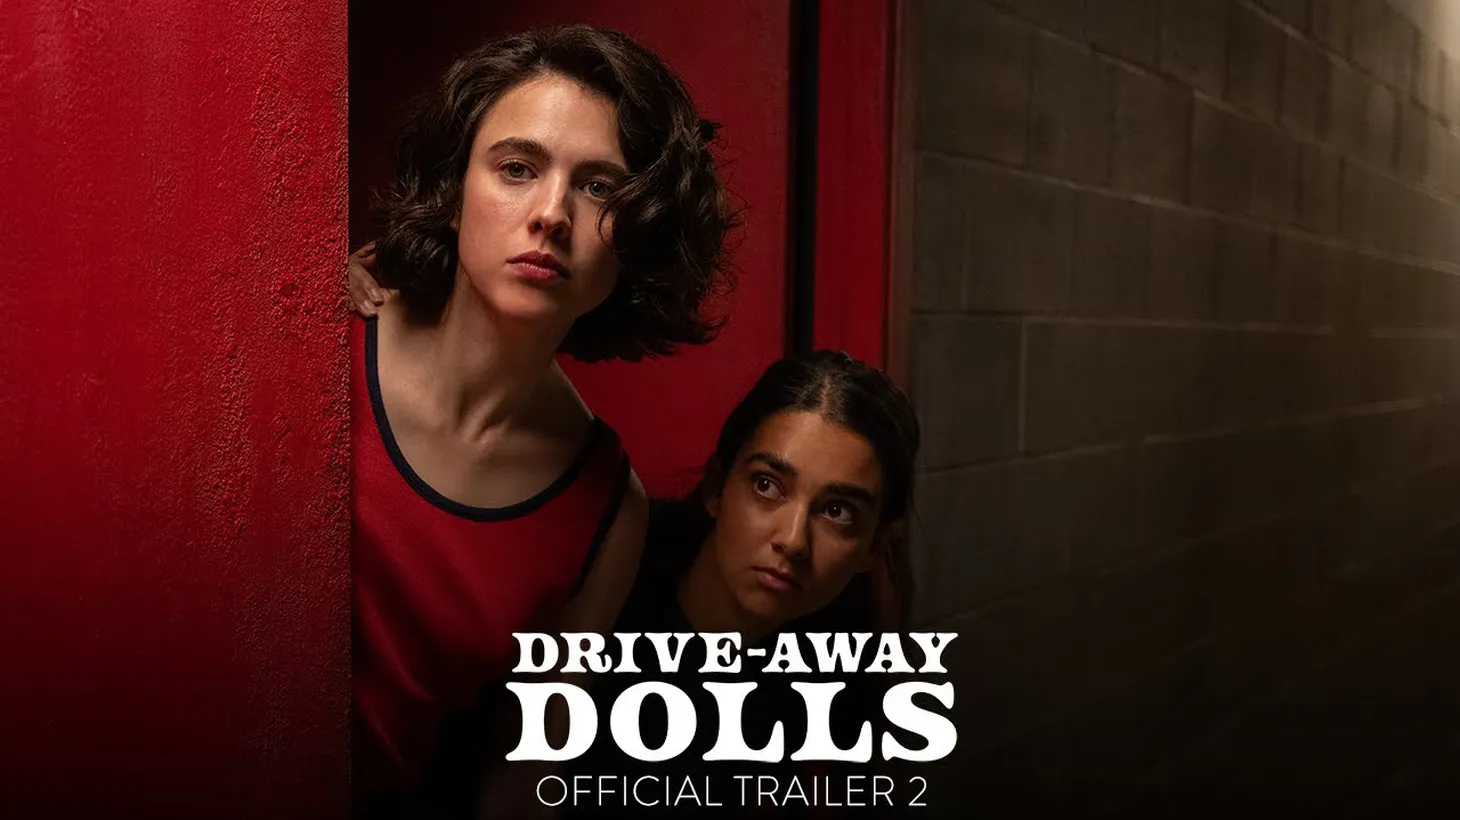 In “Drive-Away Dolls,” two girls embark on a road trip that turns awry.